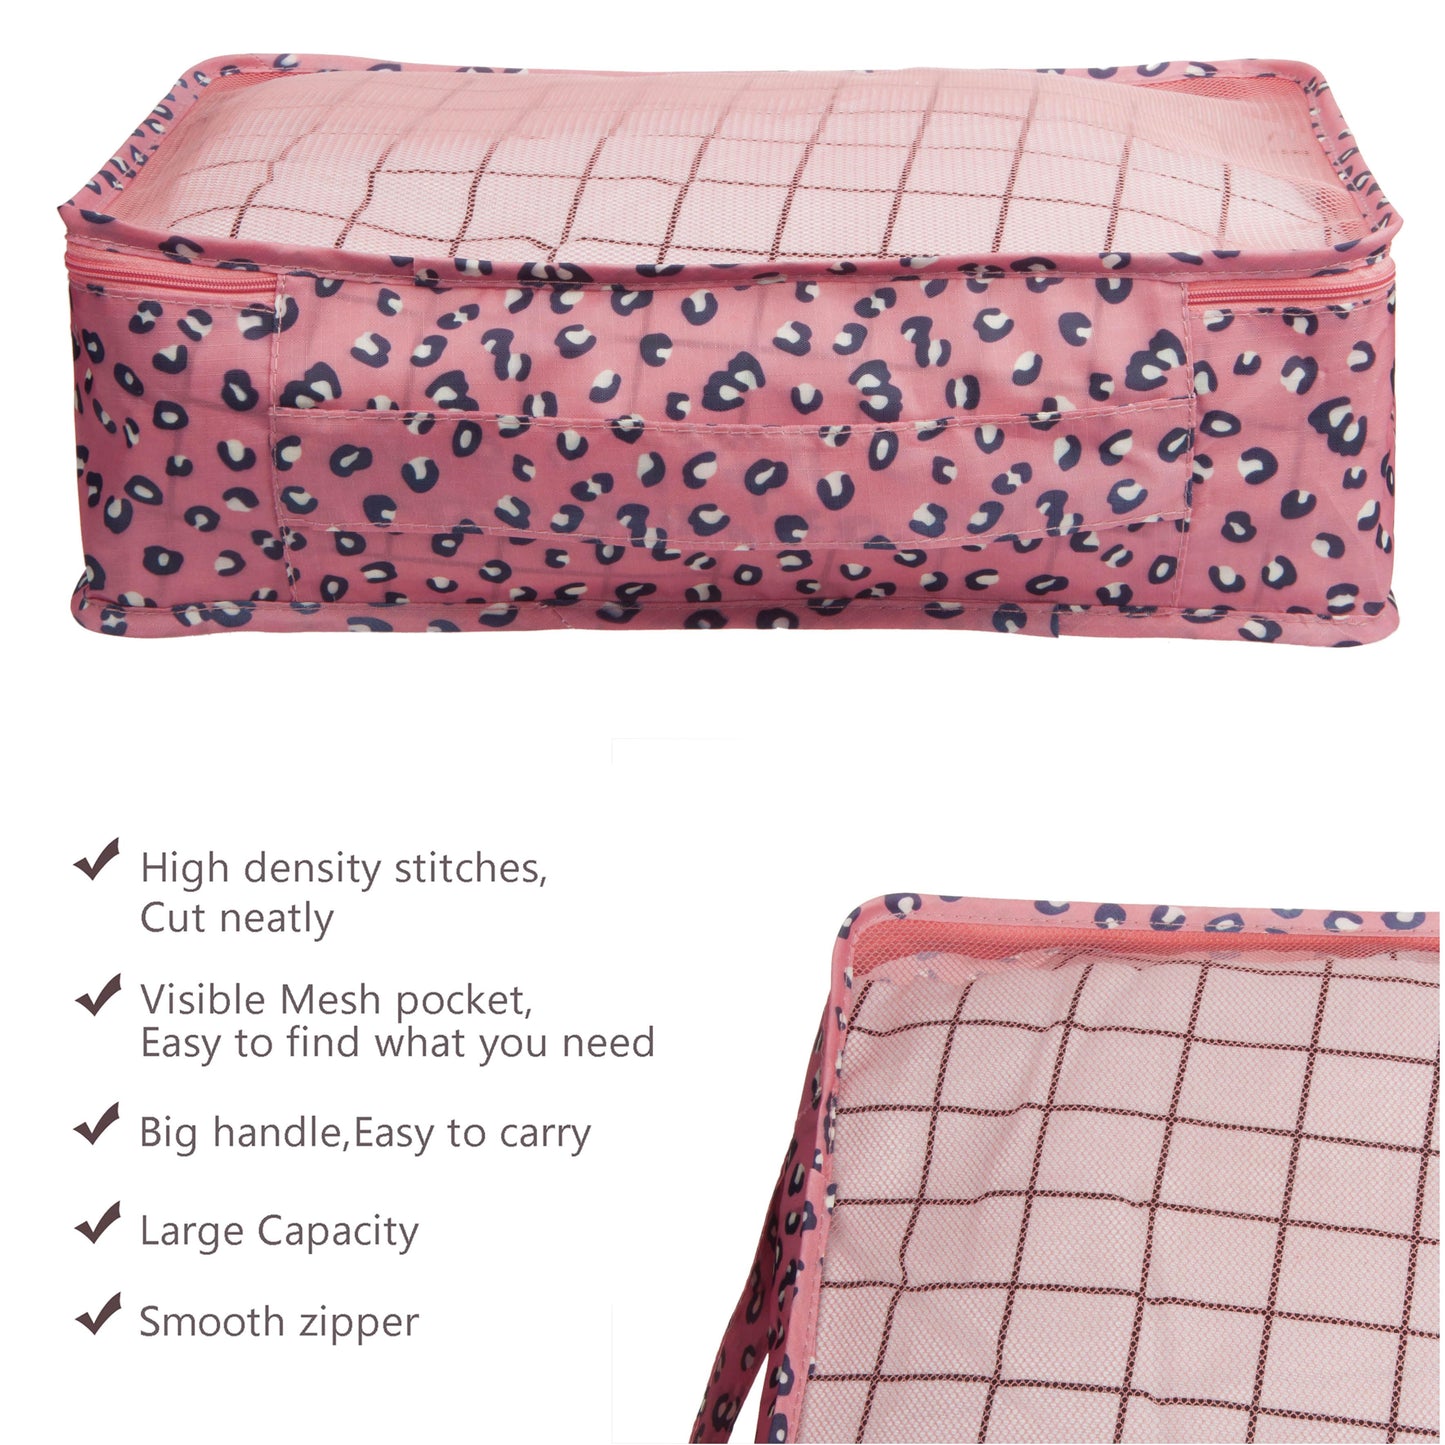 Travel Packing Organizers-7 Set Cubes Luggage Suitcase Organizer Bags Clothes Underwear Cube Shoe Pouch Pack Pink Leopard